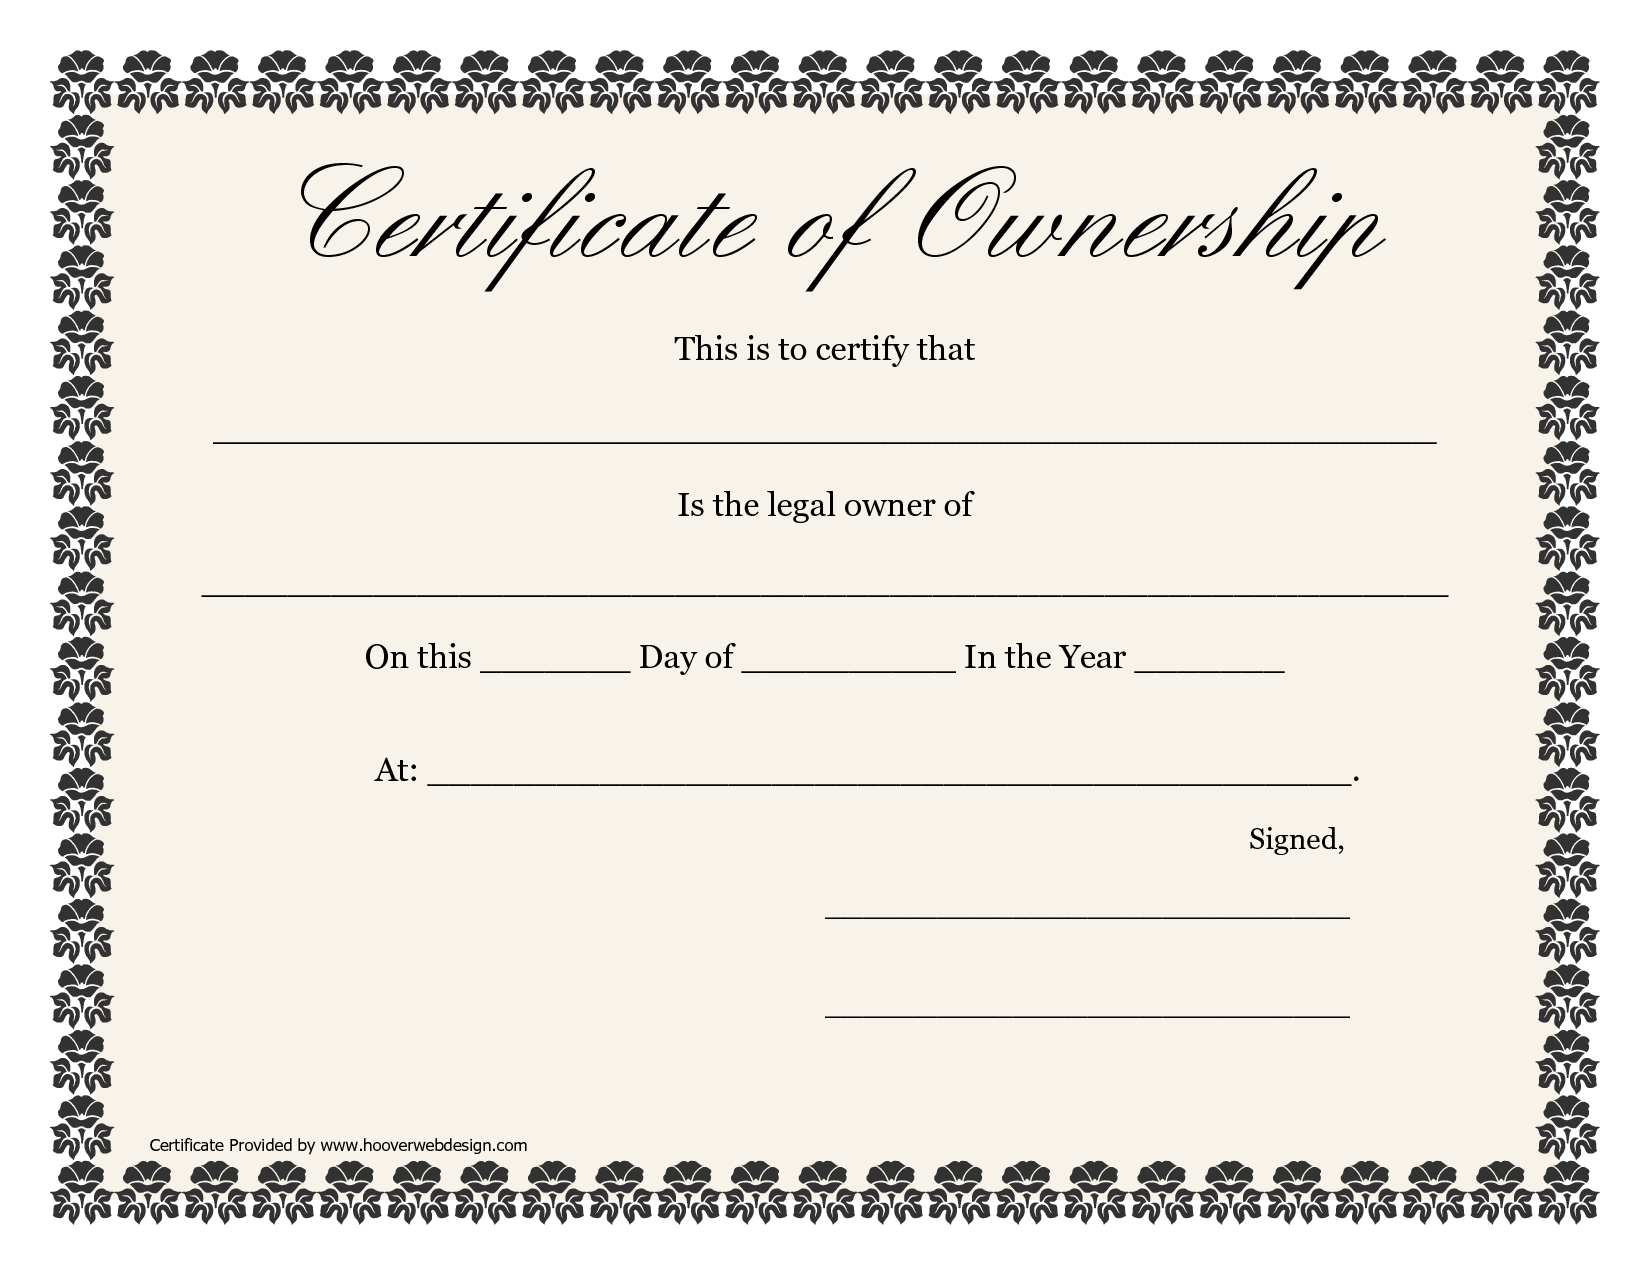 ❤️5+ Free Sample Of Certificate Of Ownership Form Template❤️ Pertaining To Ownership Certificate Template